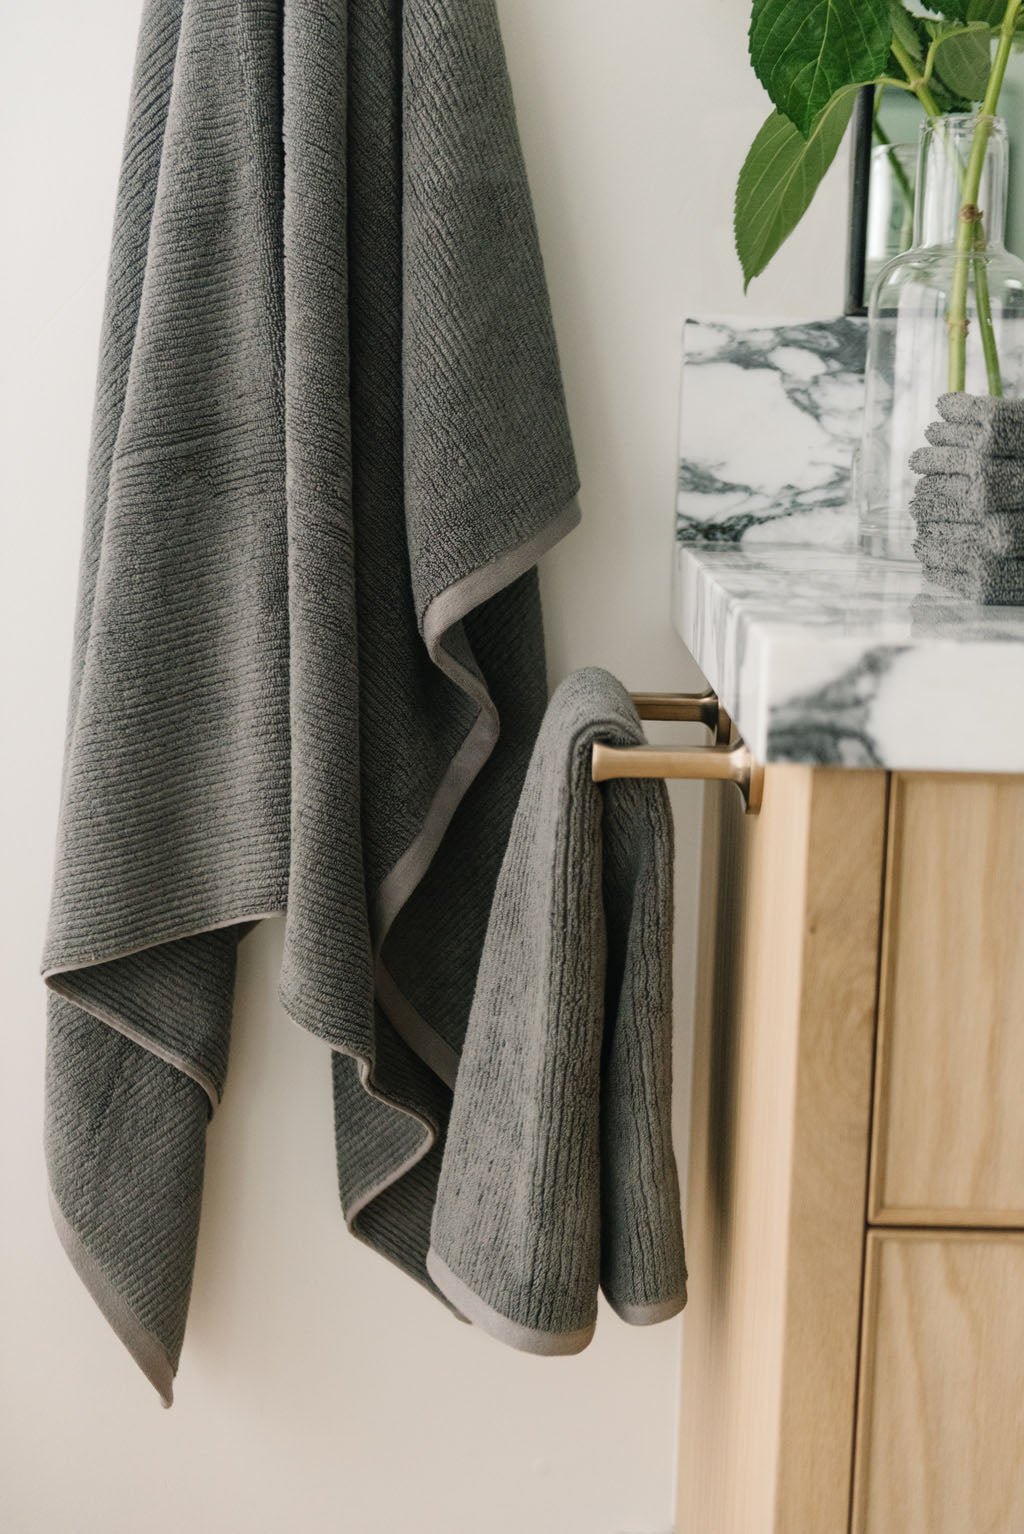 Ribbed Terry Hand Towels in the color charcoal. Photo of product taken with the product draped over a towel bar on the side of a white marble sink. 